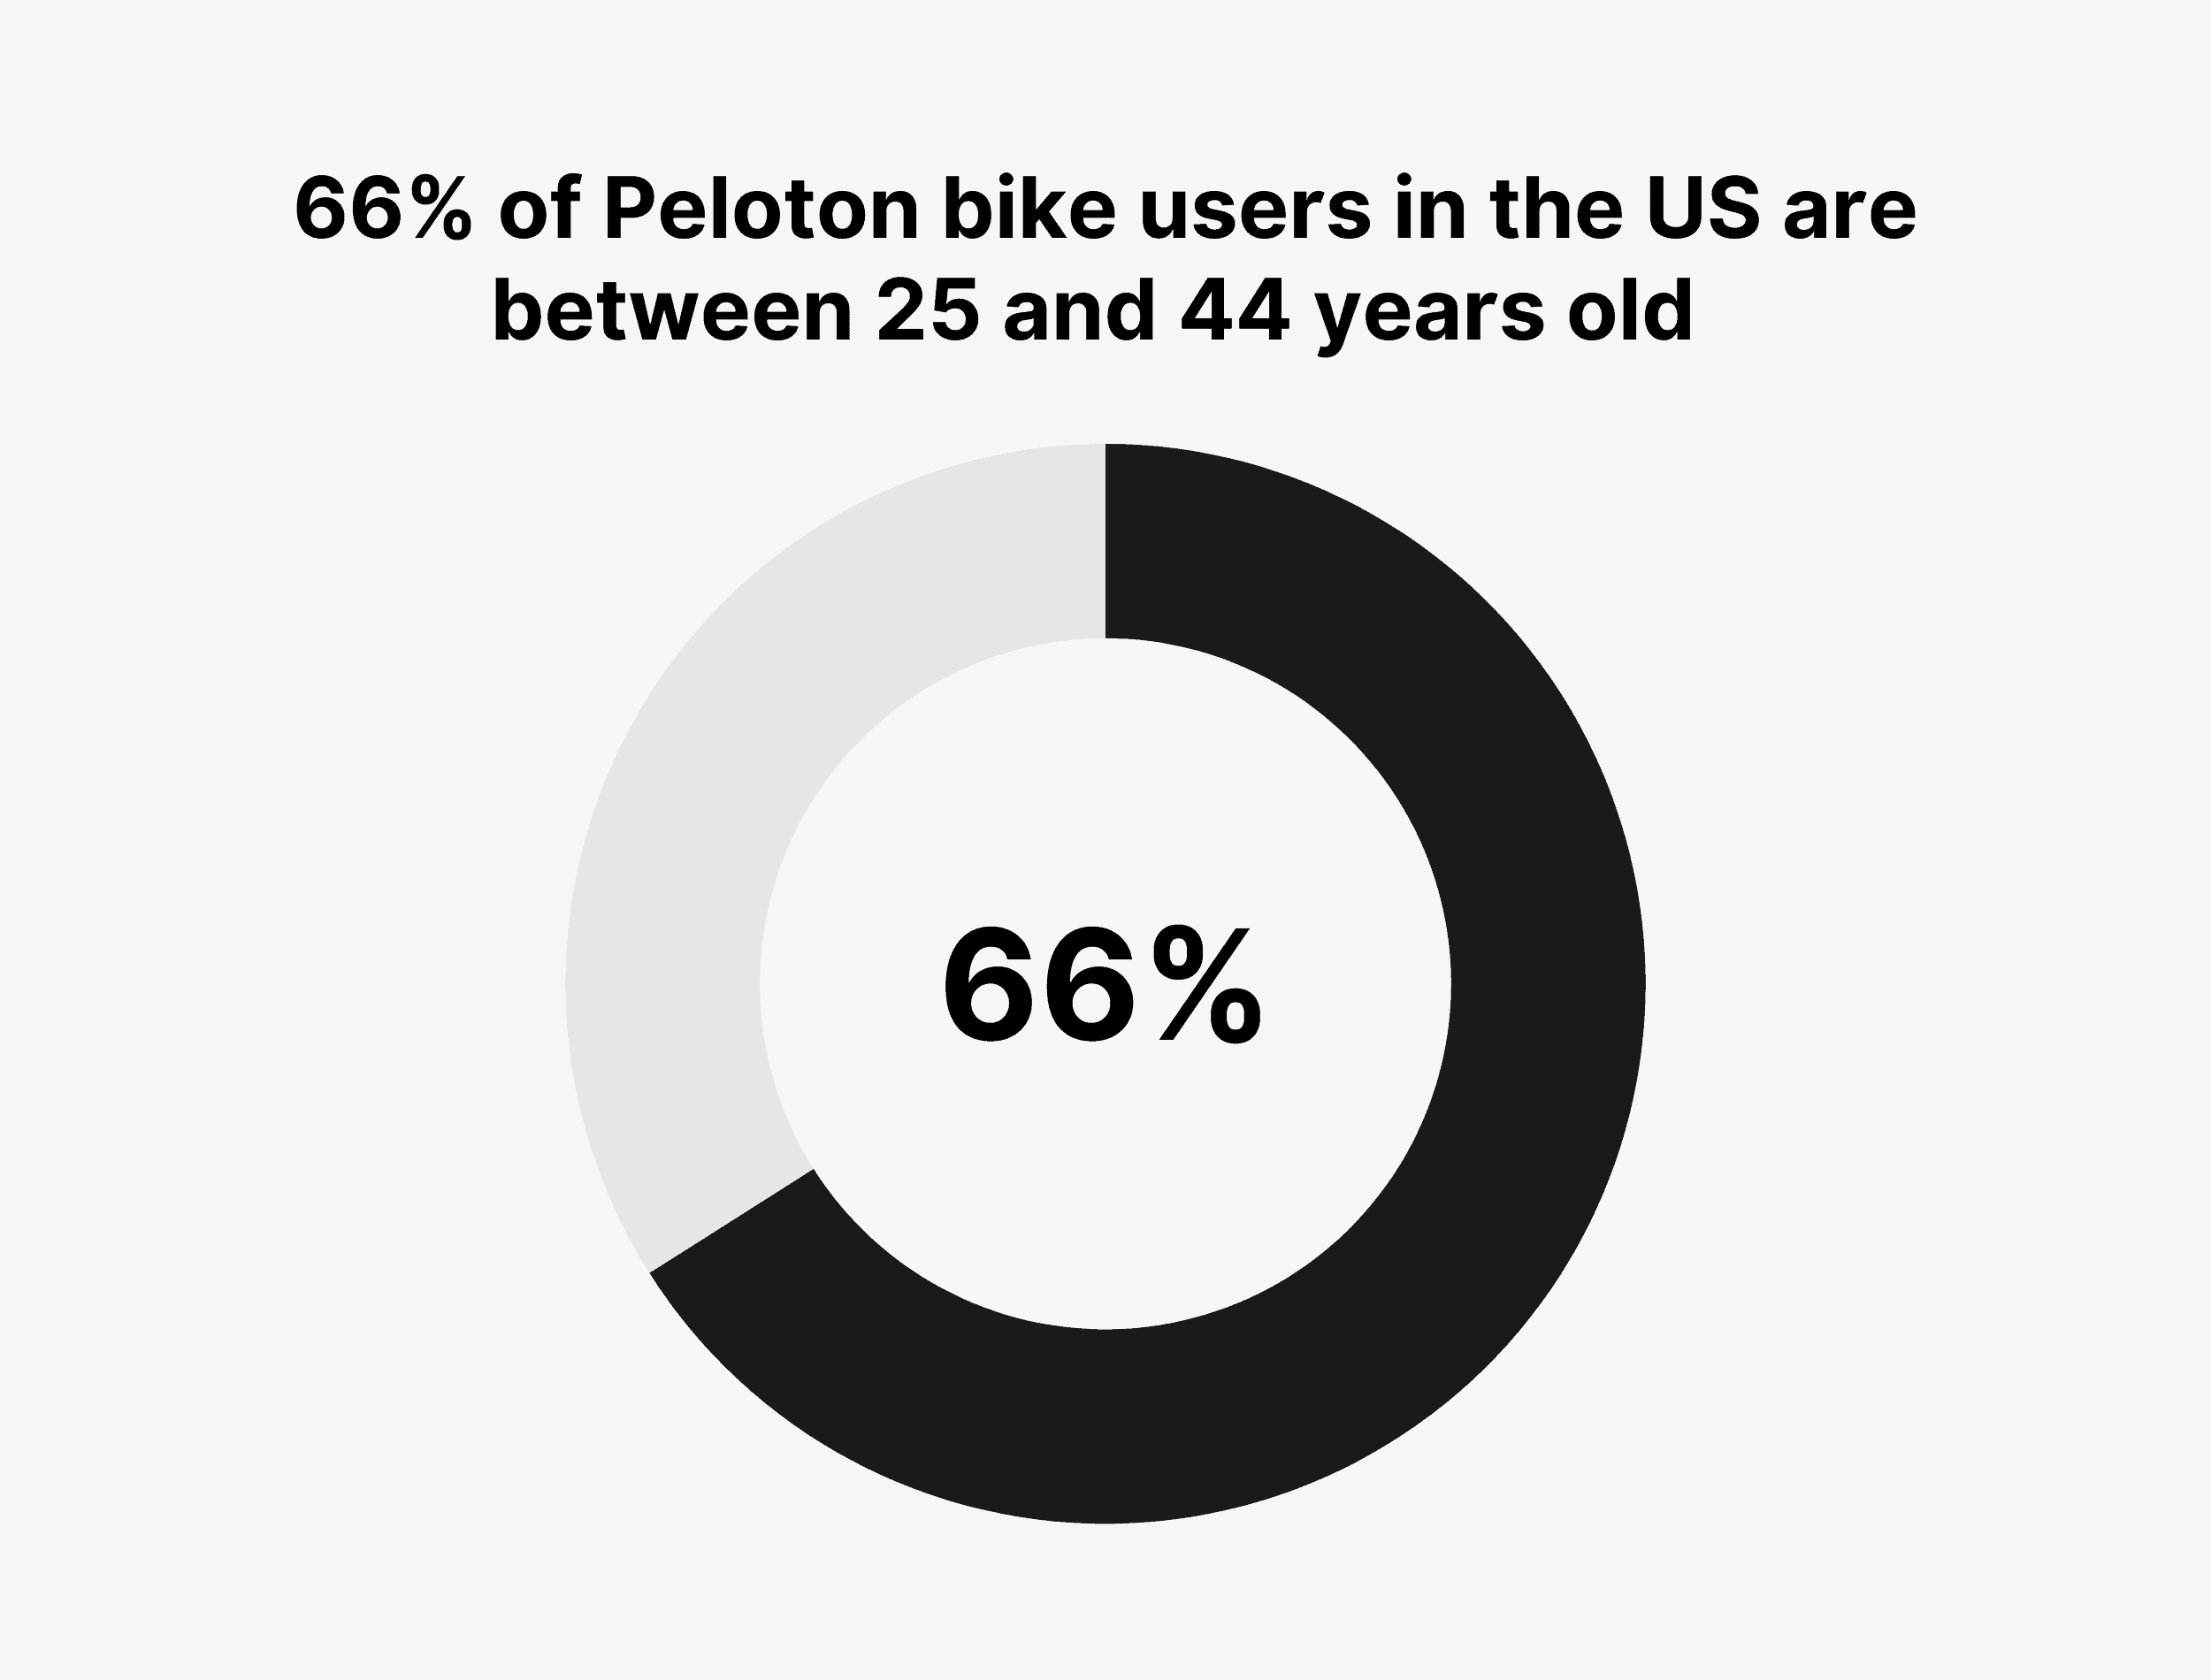 66% of Peloton bike users in the US are between 25 and 44 years old